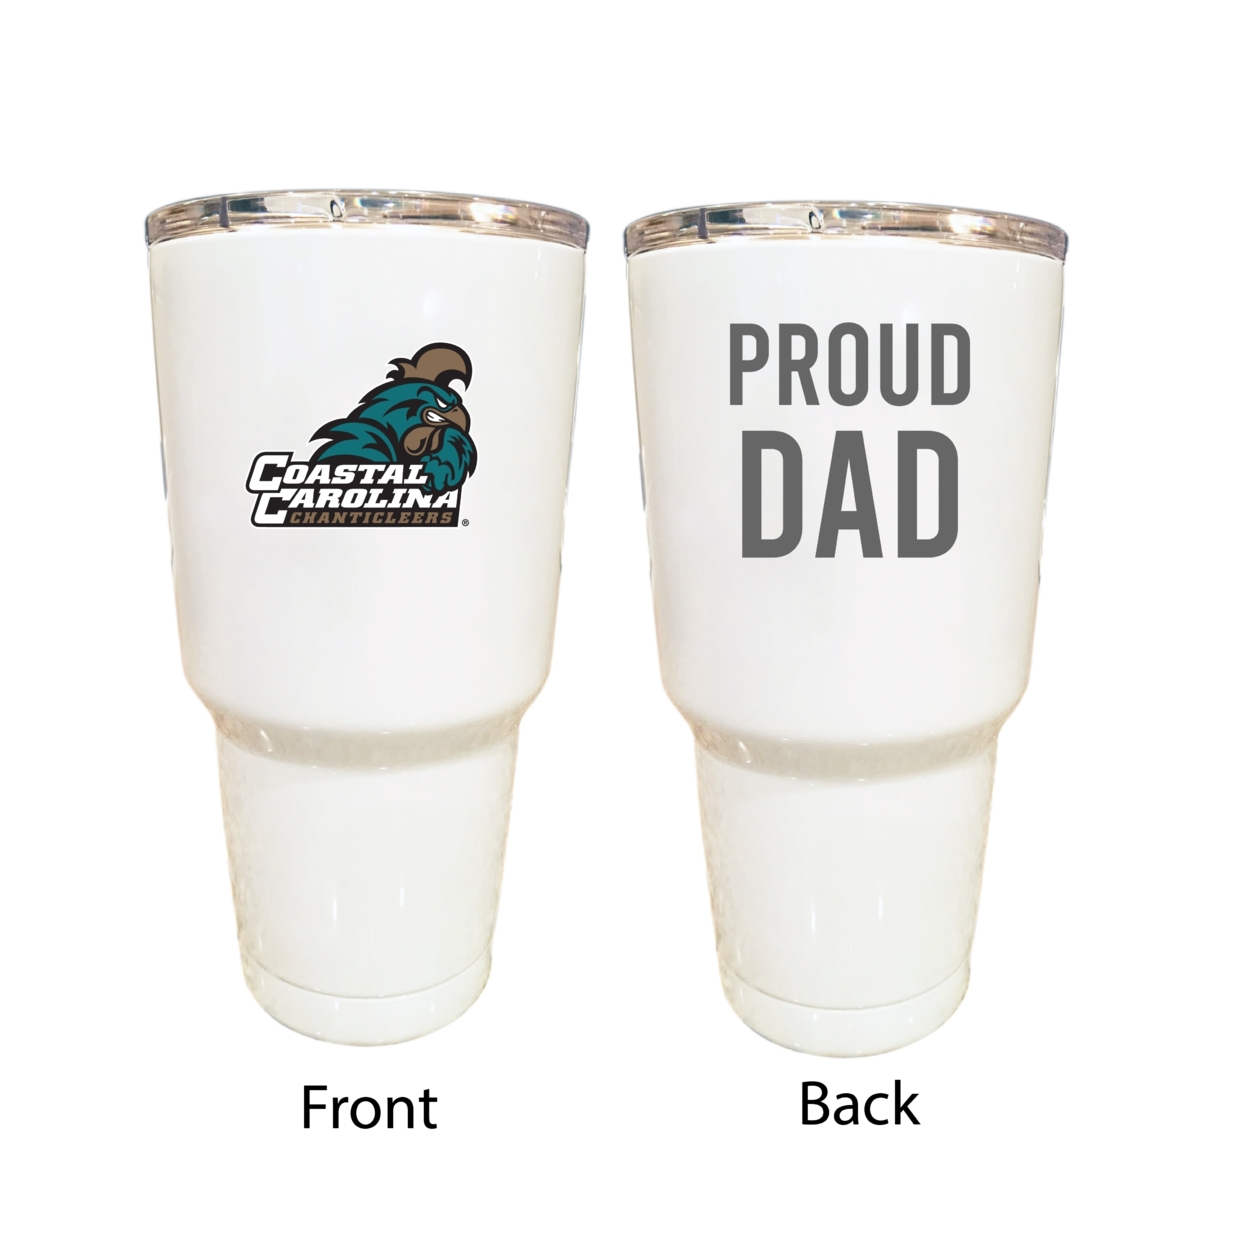 Coastal Carolina University Proud Dad 24 Oz Insulated Stainless Steel Tumblers Choose Your Color.